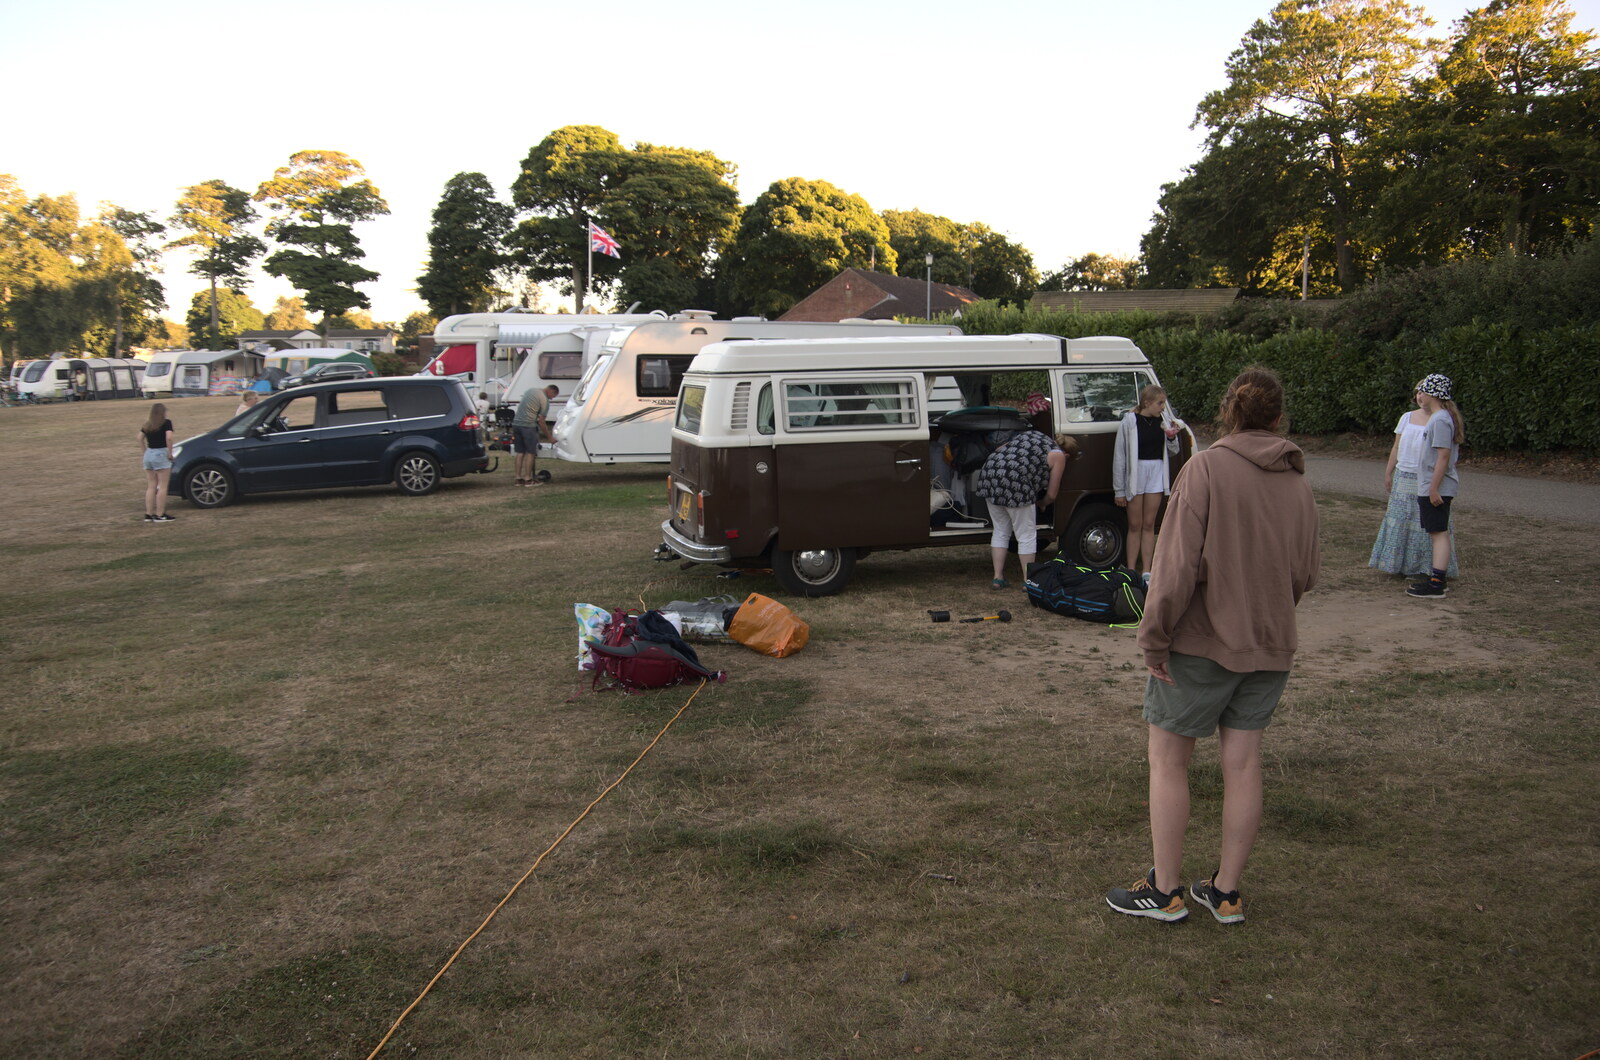 The others arrive later in the evening from Camping at Forest Park, Cromer, Norfolk - 12th August 2022